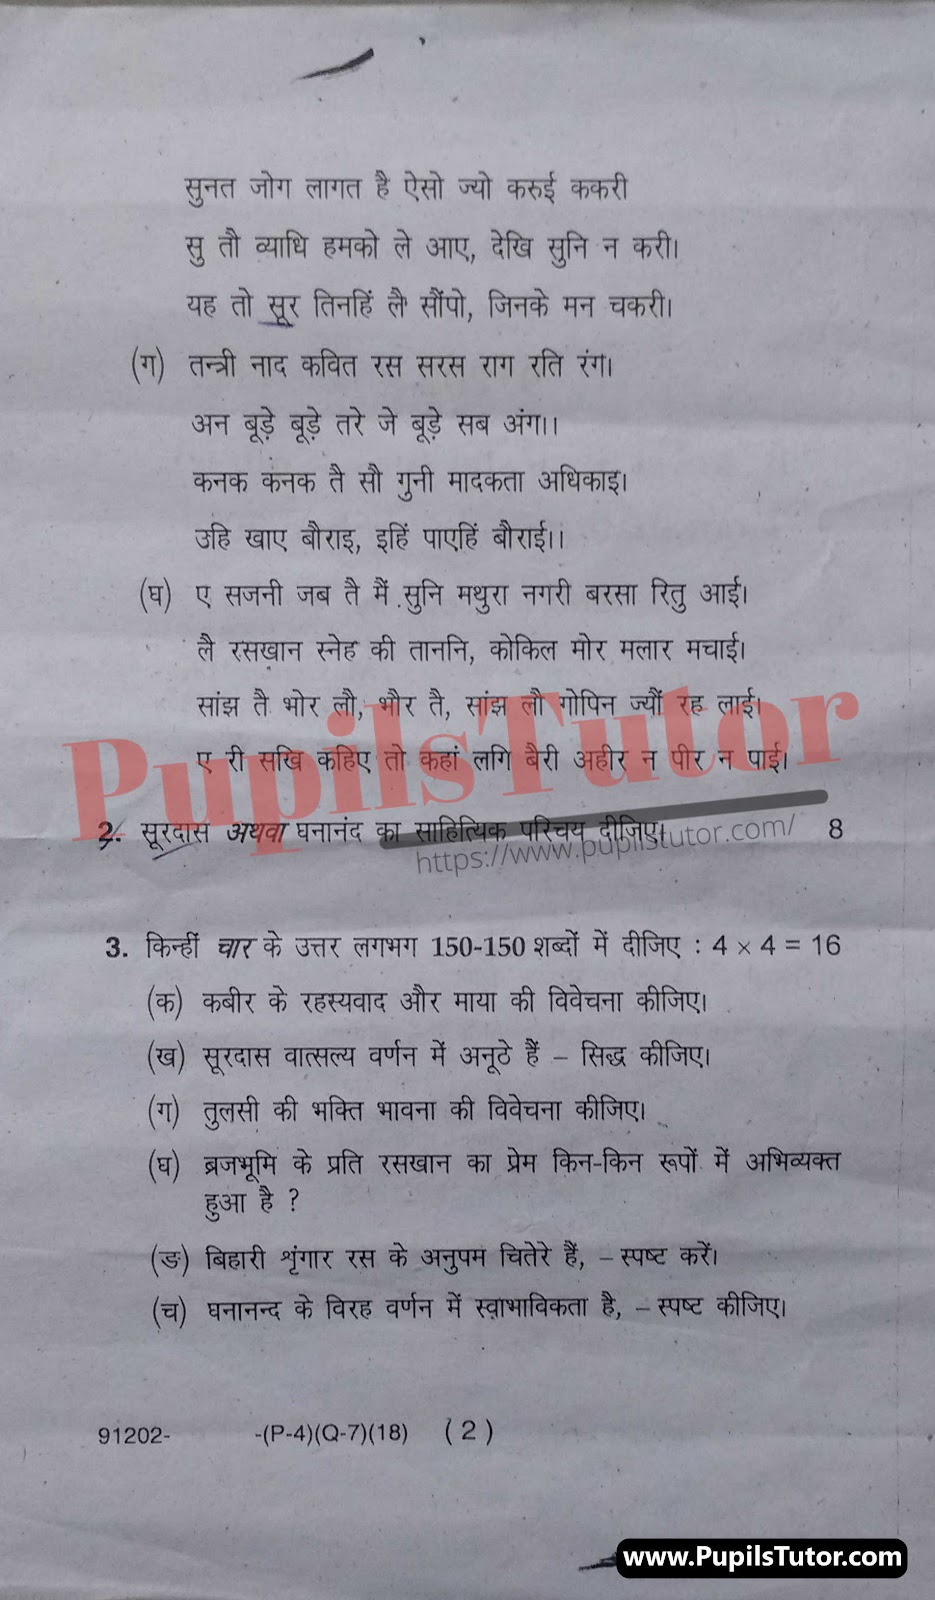 M.D. University B.A. Hindi (Compulsory) First Semester Important Question Answer And Solution - www.pupilstutor.com (Paper Page Number 2)